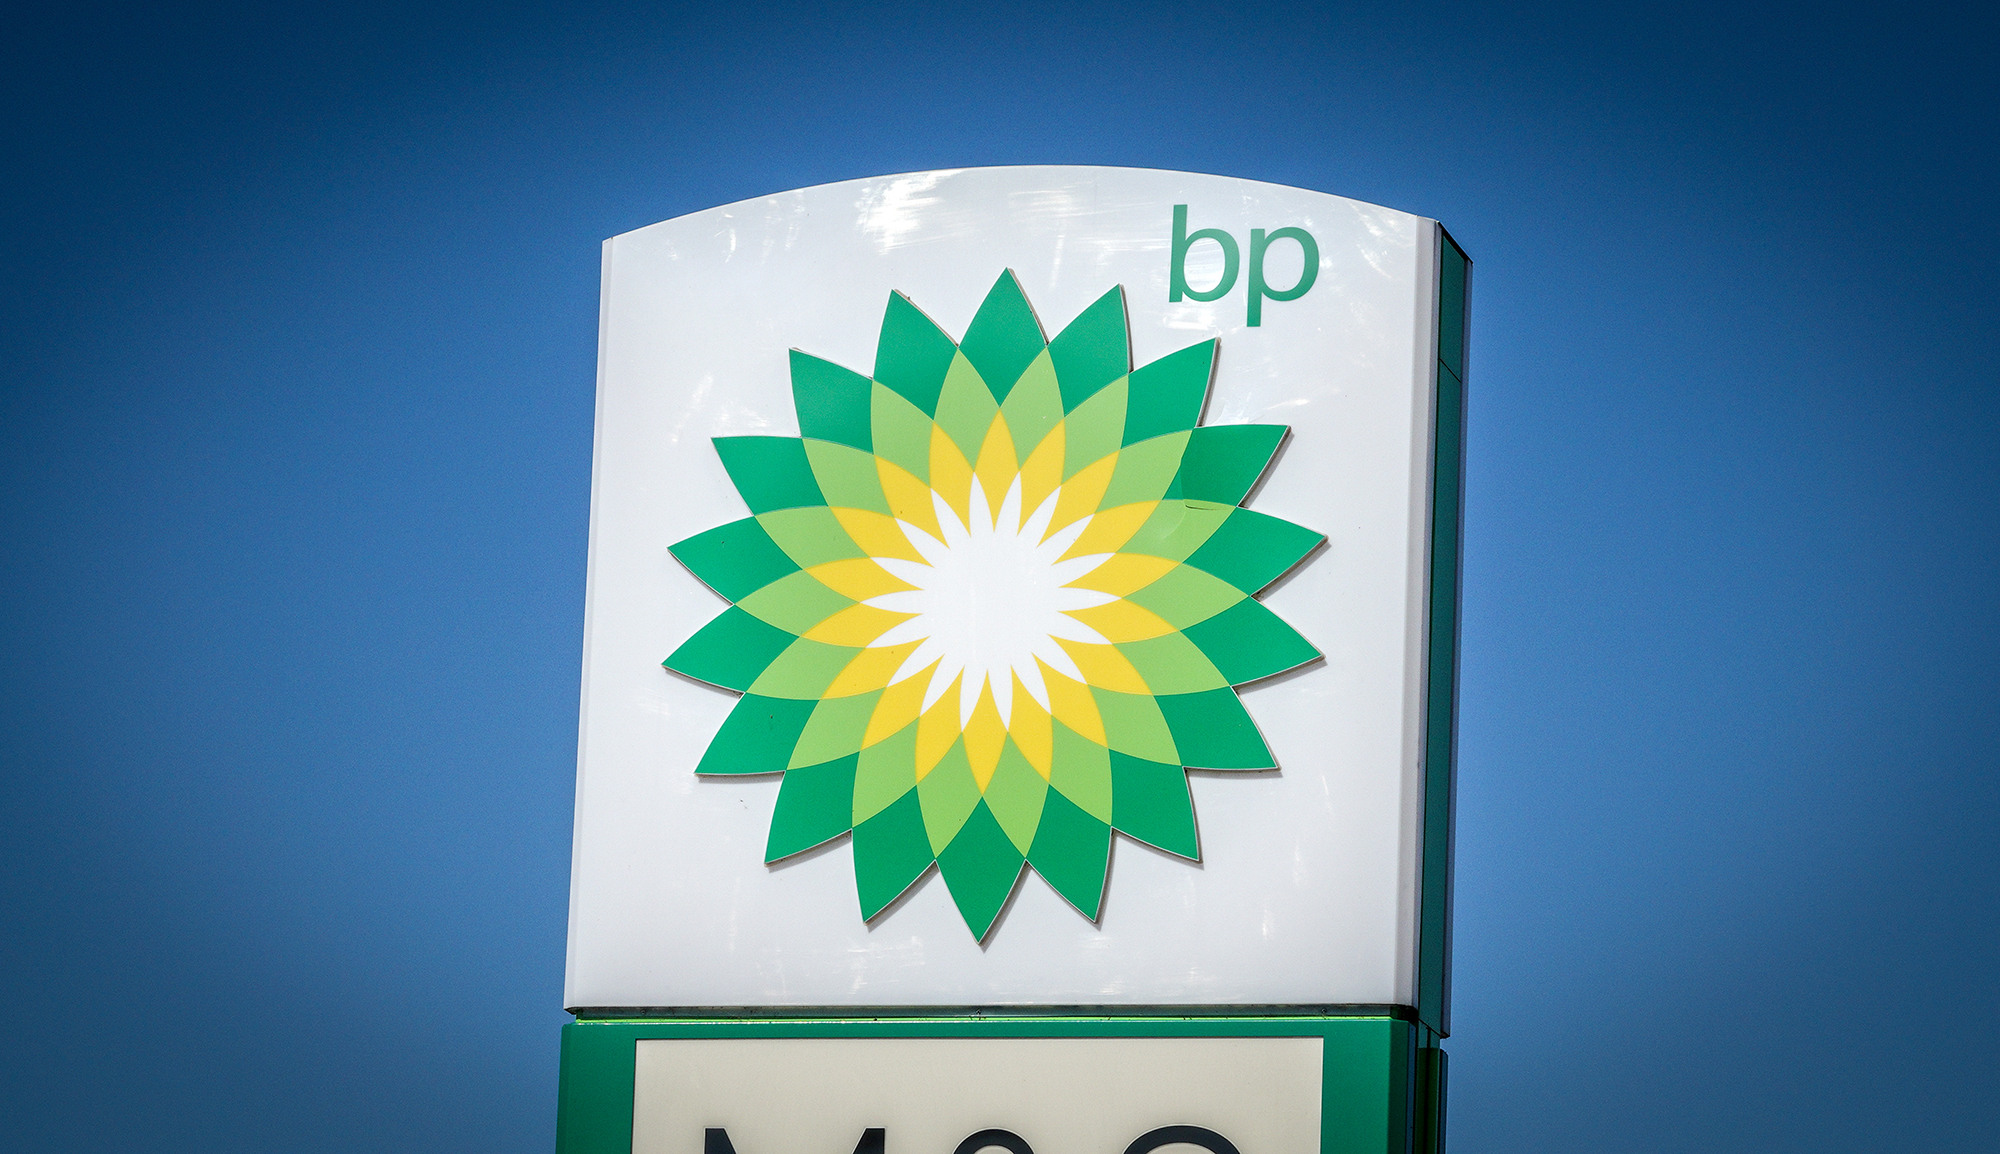 The BP logo is displayed outside a petrol station near Warmister, on August 15, 2022 in Wiltshire, England. 